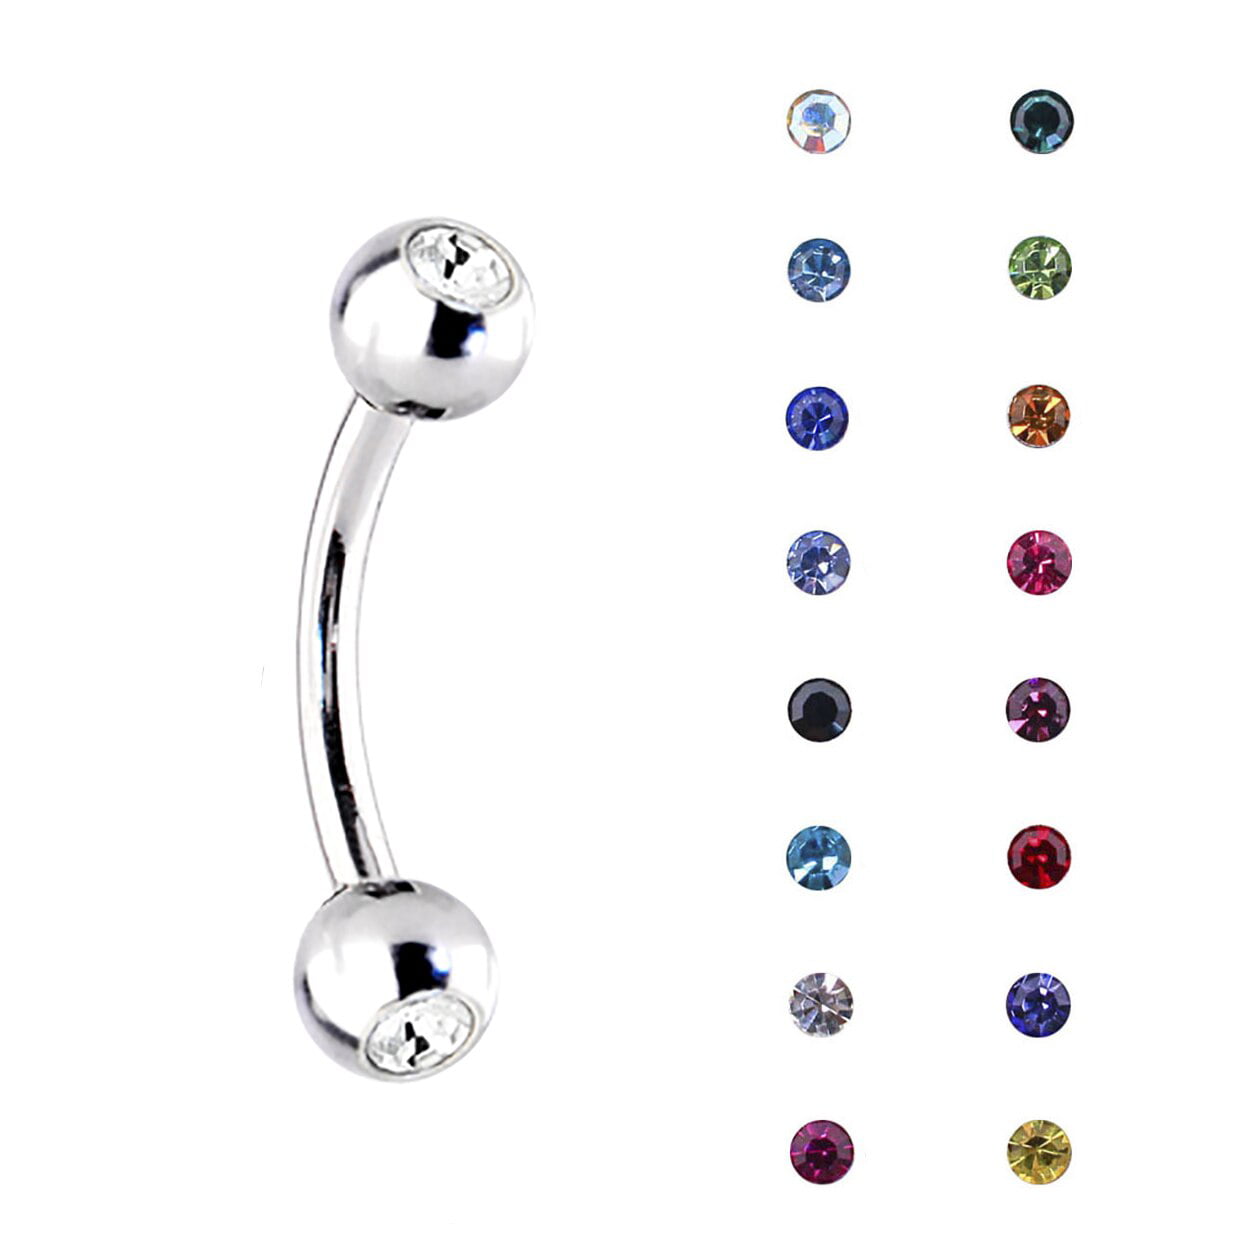 Pair Eyebrow Ring Tragus Small Gauge Nipple Curved Barbell 16g  5/16" RED CZ GEM 